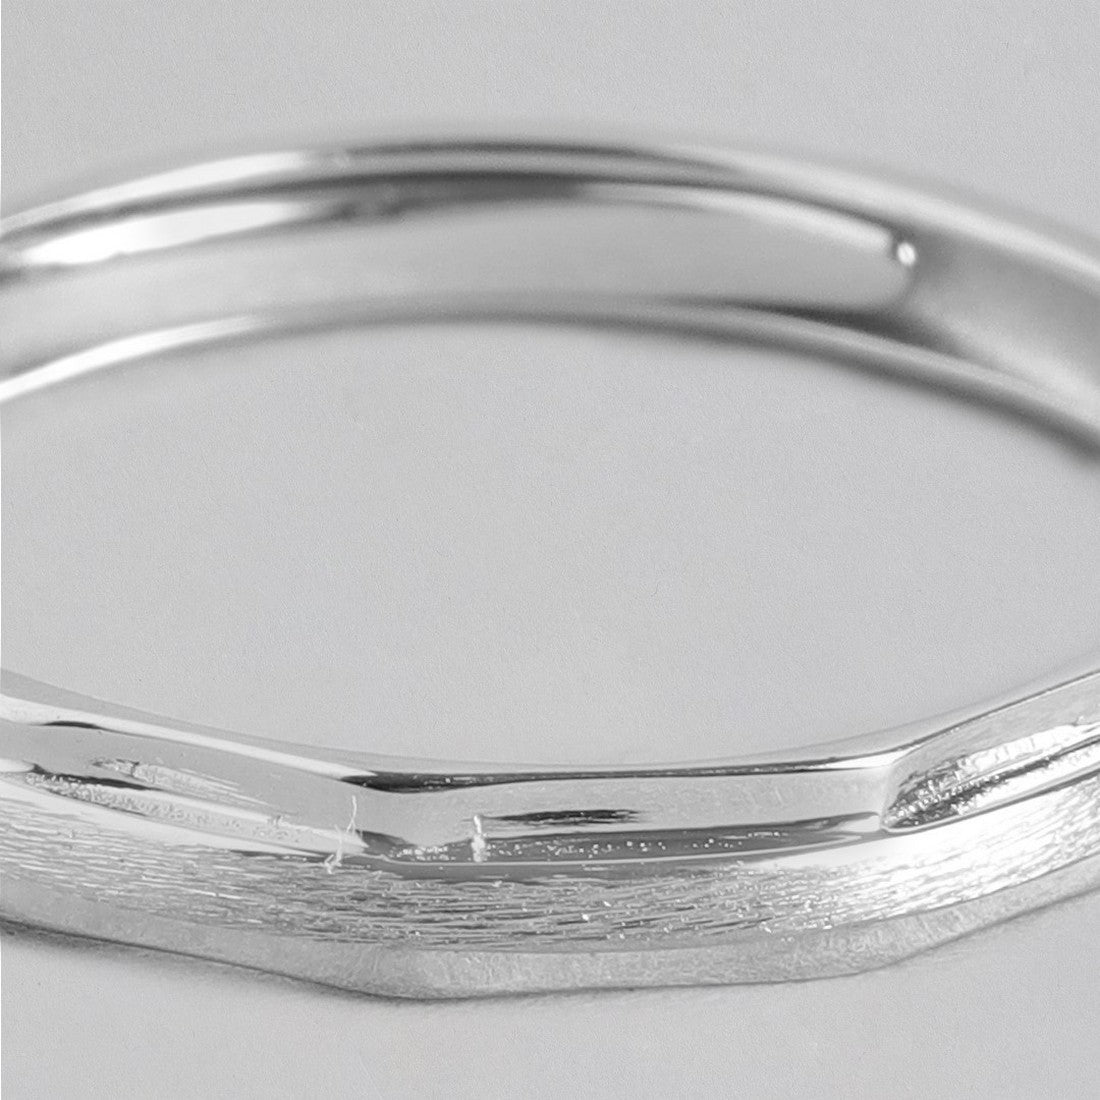 Rhodium Plated Minimalistic 925 Sterling Silver Band Ring (Adjustable) For Him (Adjustable)